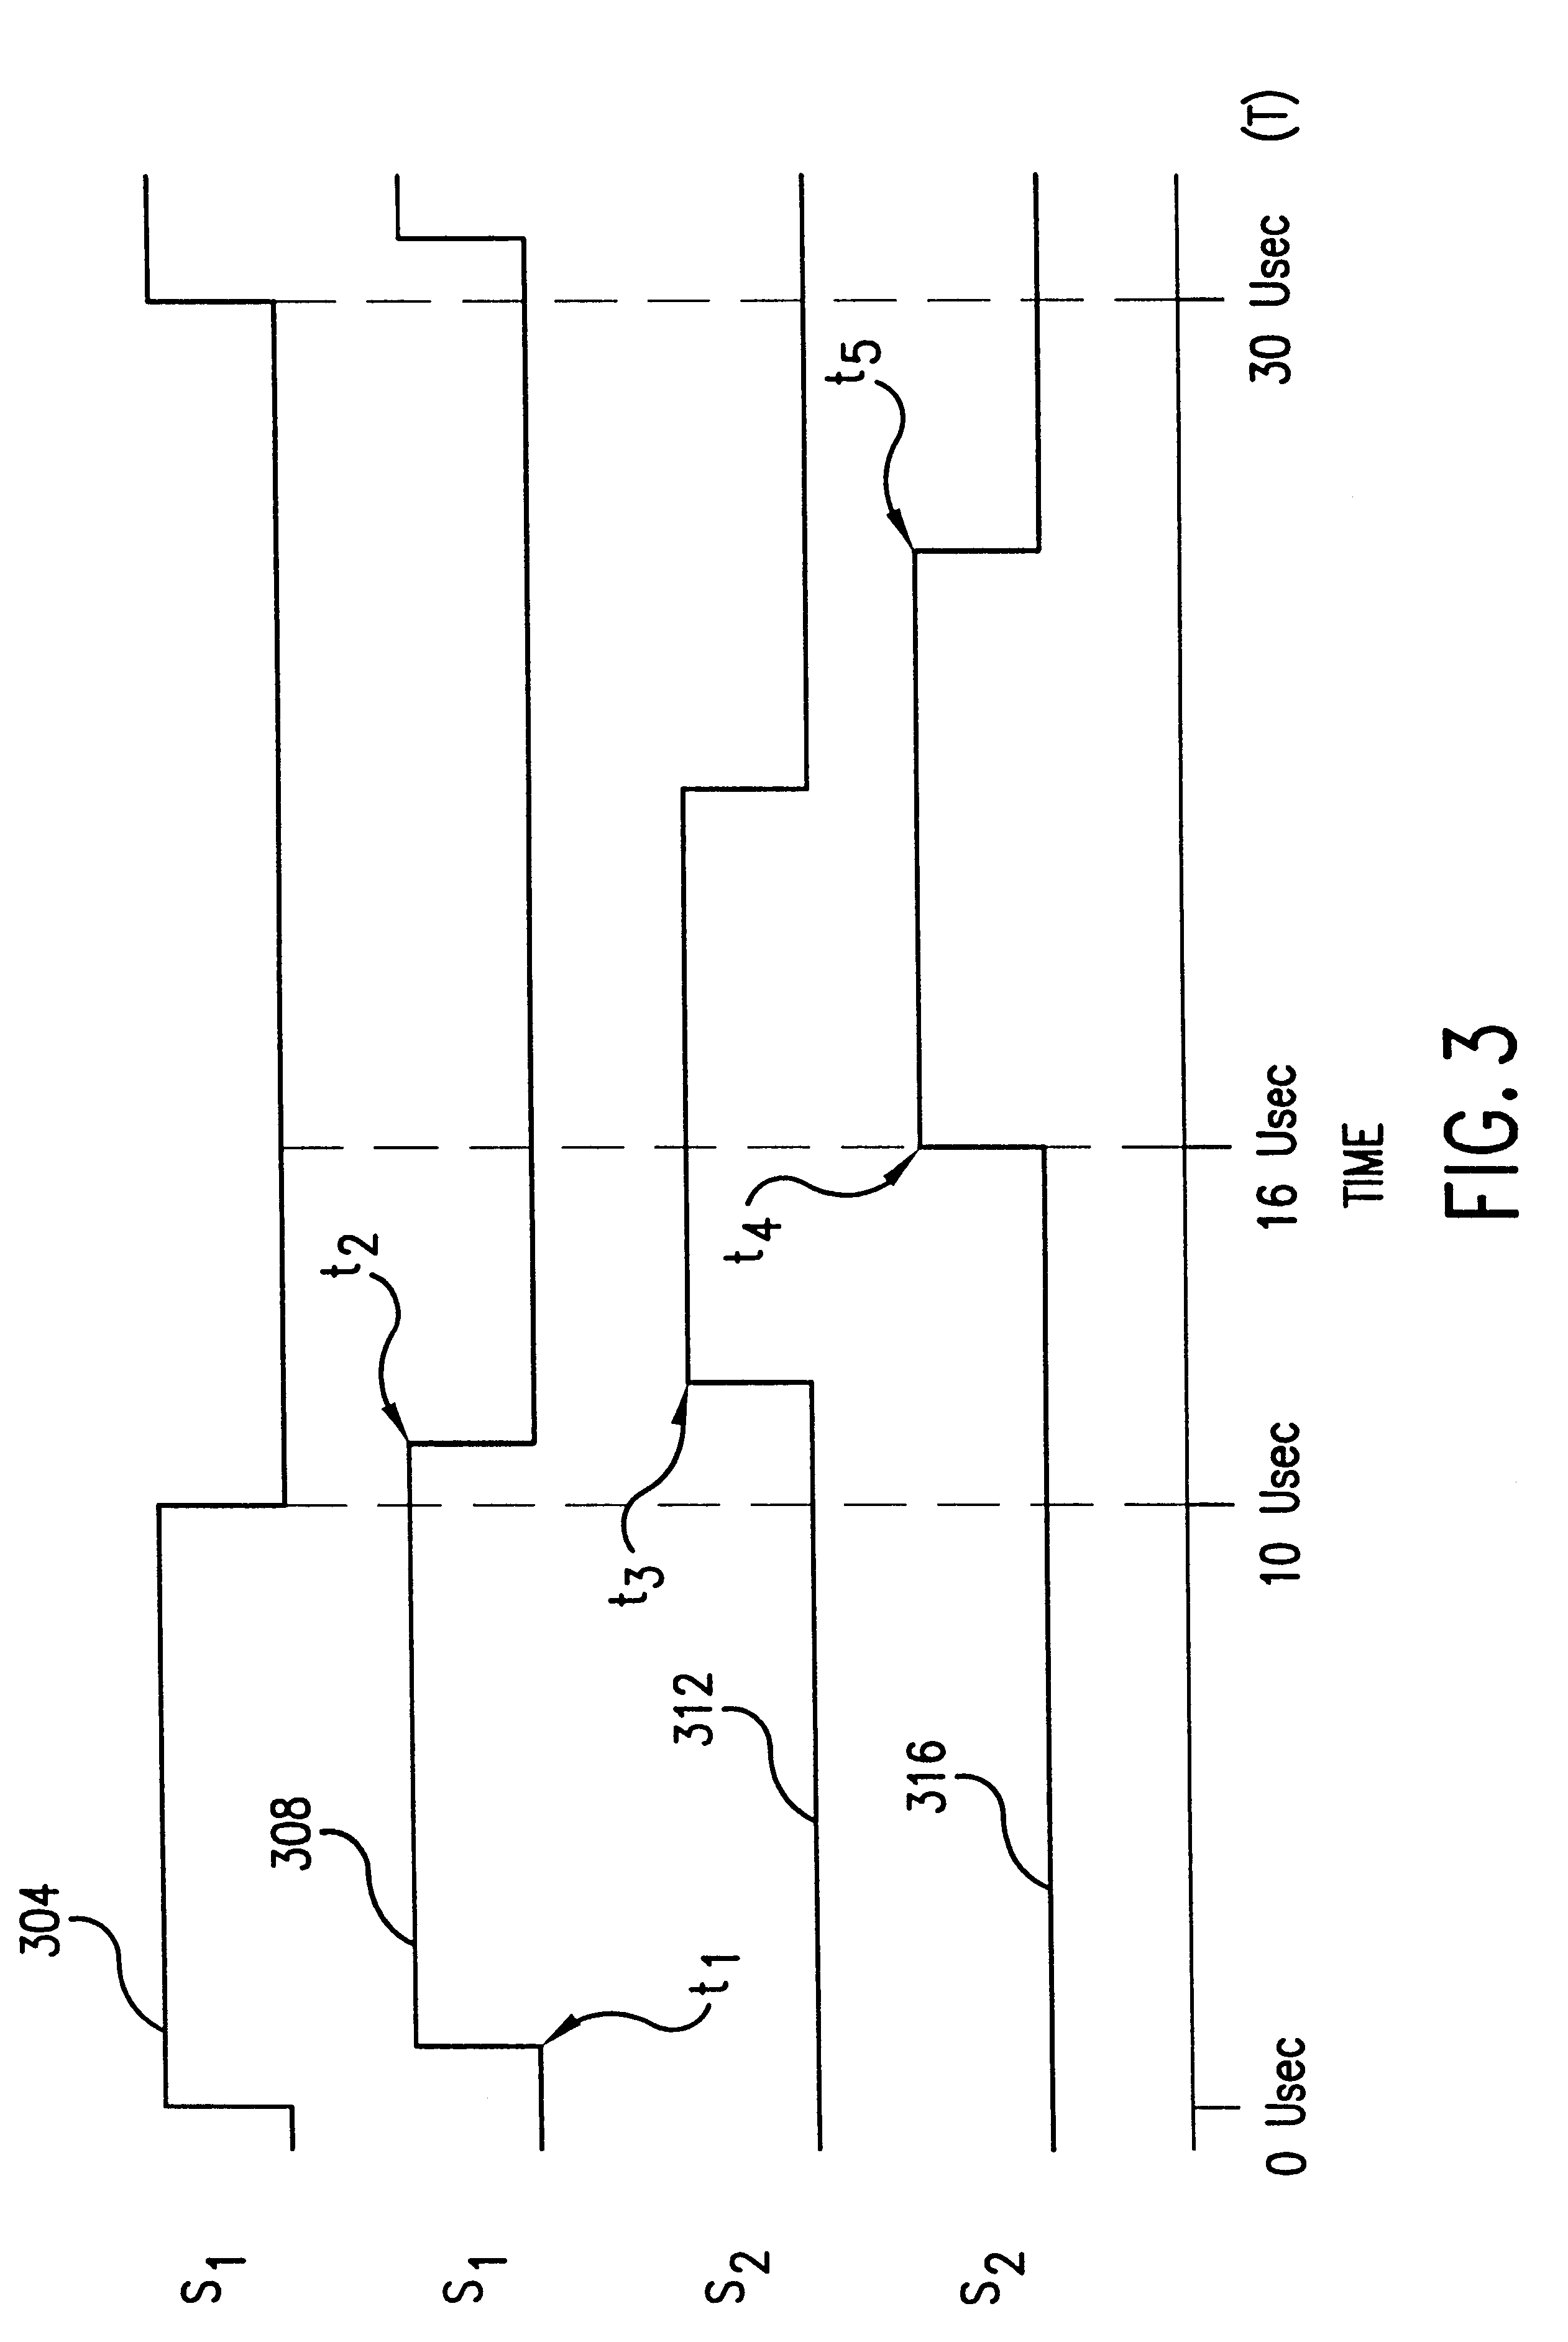 System and method for distance measurement by inphase and quadrature signals in a radio system